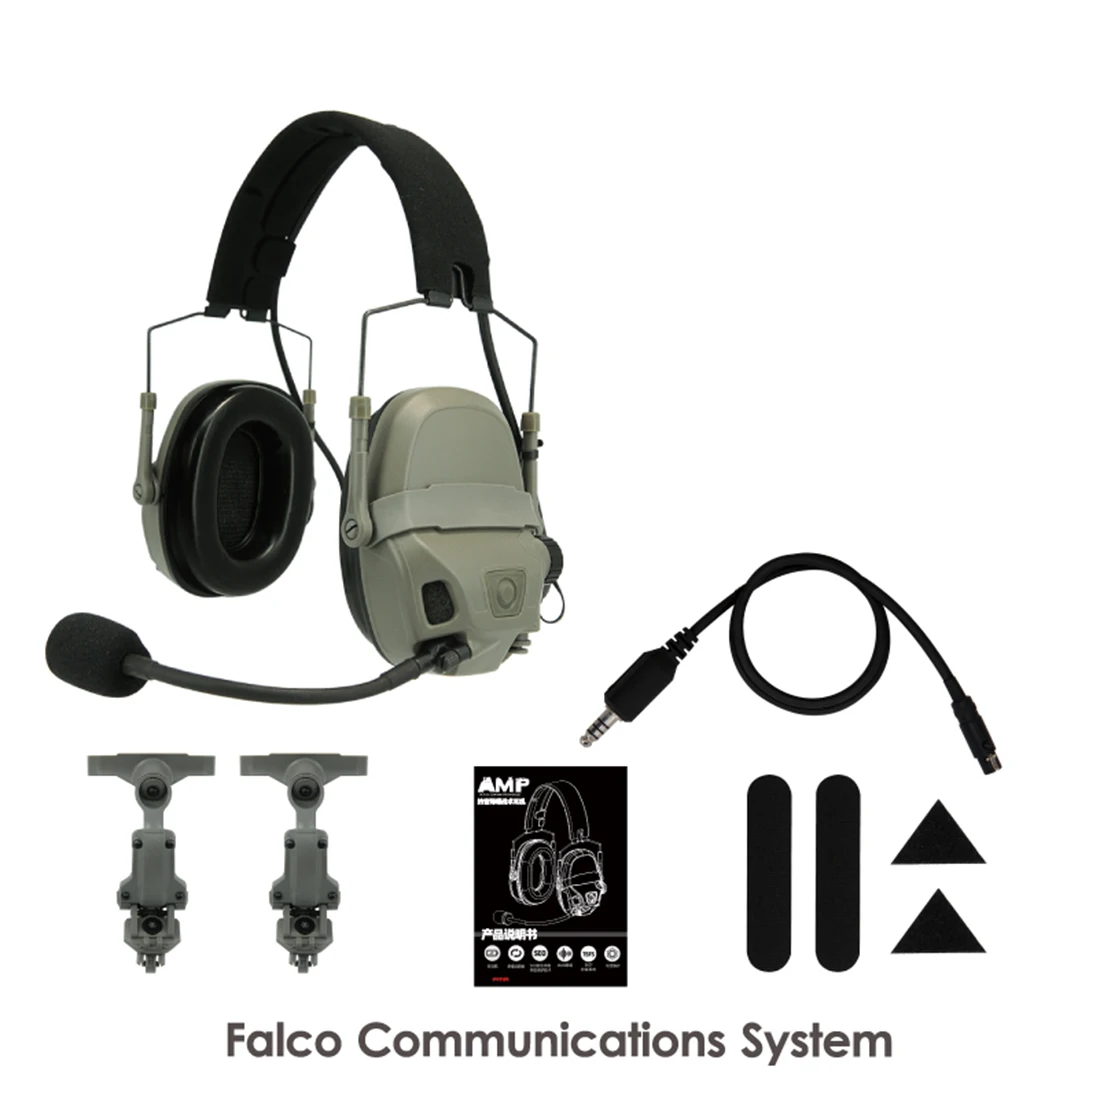 

FCS AMP Dual Channel Pickup Noise Reduction Headphone Tactical Protective Headset - FG